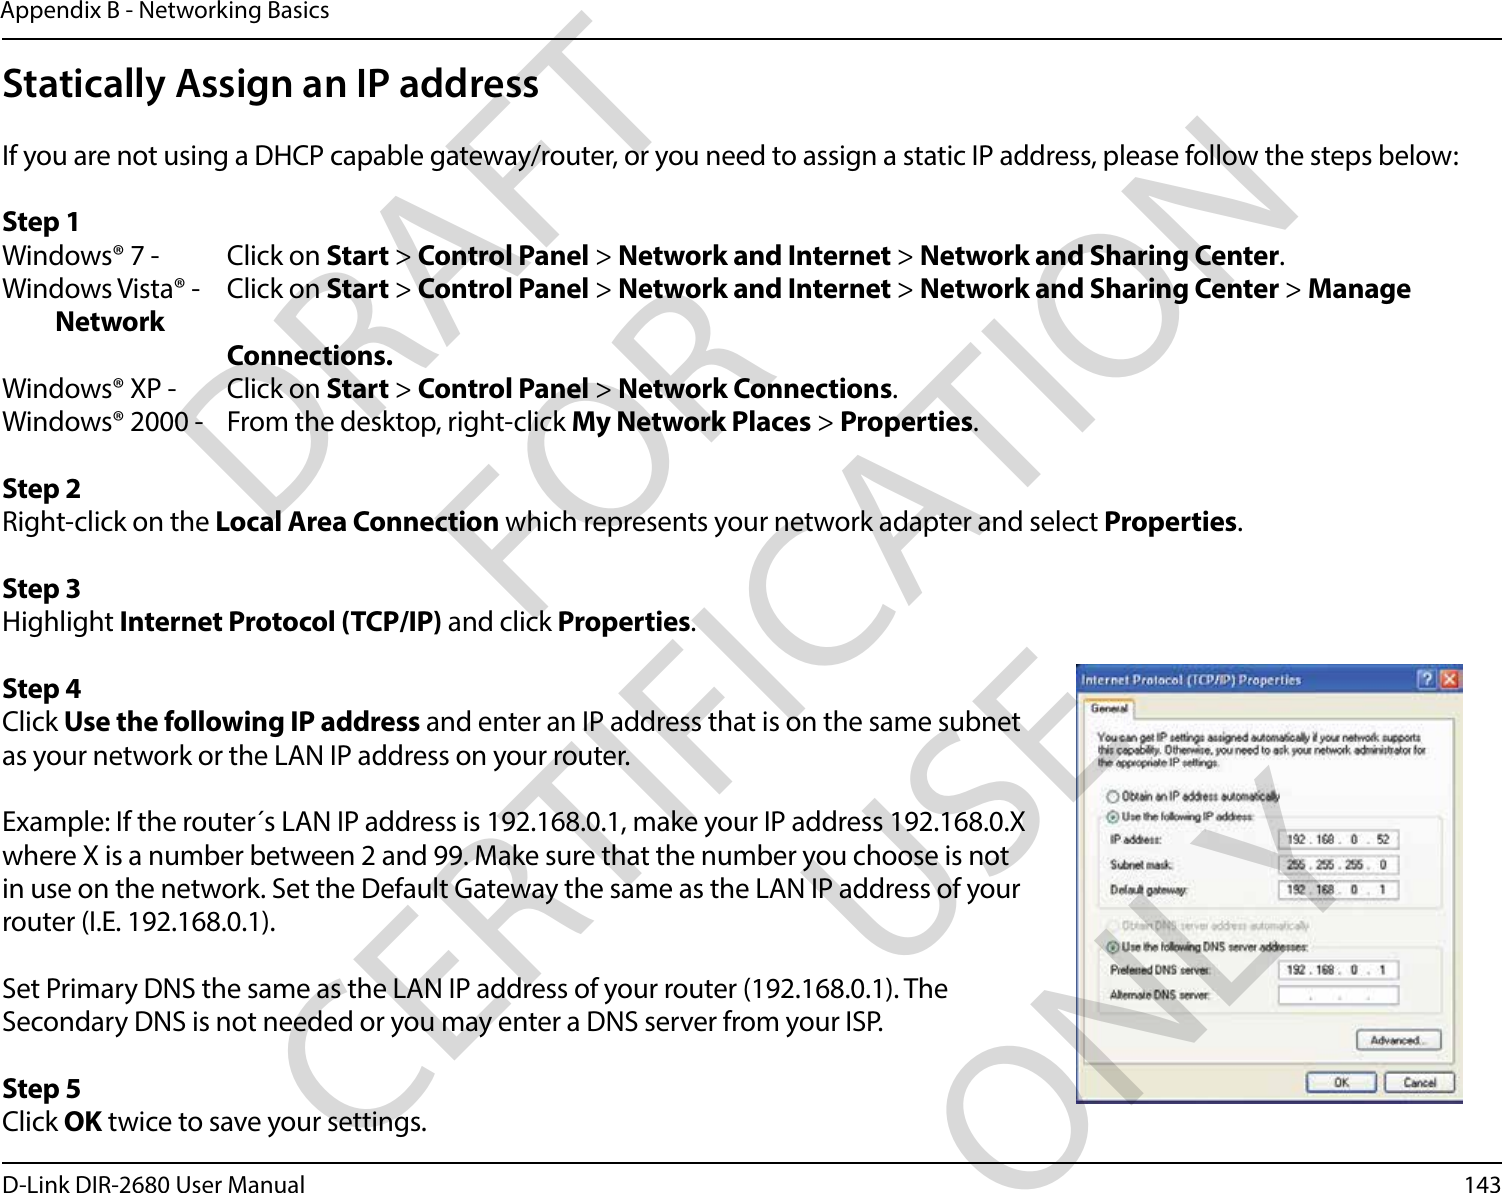 143D-Link DIR-2680 User ManualAppendix B - Networking BasicsStatically Assign an IP addressIf you are not using a DHCP capable gateway/router, or you need to assign a static IP address, please follow the steps below:Step 1Windows® 7 -  Click on Start &gt; Control Panel &gt; Network and Internet &gt; Network and Sharing Center.Windows Vista® -  Click on Start &gt; Control Panel &gt; Network and Internet &gt; Network and Sharing Center &gt; Manage Network    Connections.Windows® XP -  Click on Start &gt; Control Panel &gt; Network Connections.Windows® 2000 -  From the desktop, right-click My Network Places &gt; Properties.Step 2Right-click on the Local Area Connection which represents your network adapter and select Properties.Step 3Highlight Internet Protocol (TCP/IP) and click Properties.Step 4Click Use the following IP address and enter an IP address that is on the same subnet as your network or the LAN IP address on your router. Example: If the router´s LAN IP address is 192.168.0.1, make your IP address 192.168.0.X where X is a number between 2 and 99. Make sure that the number you choose is not in use on the network. Set the Default Gateway the same as the LAN IP address of your router (I.E. 192.168.0.1). Set Primary DNS the same as the LAN IP address of your router (192.168.0.1). The Secondary DNS is not needed or you may enter a DNS server from your ISP.Step 5Click OK twice to save your settings.DRAFT FOR CERTIFICATION USE ONLY